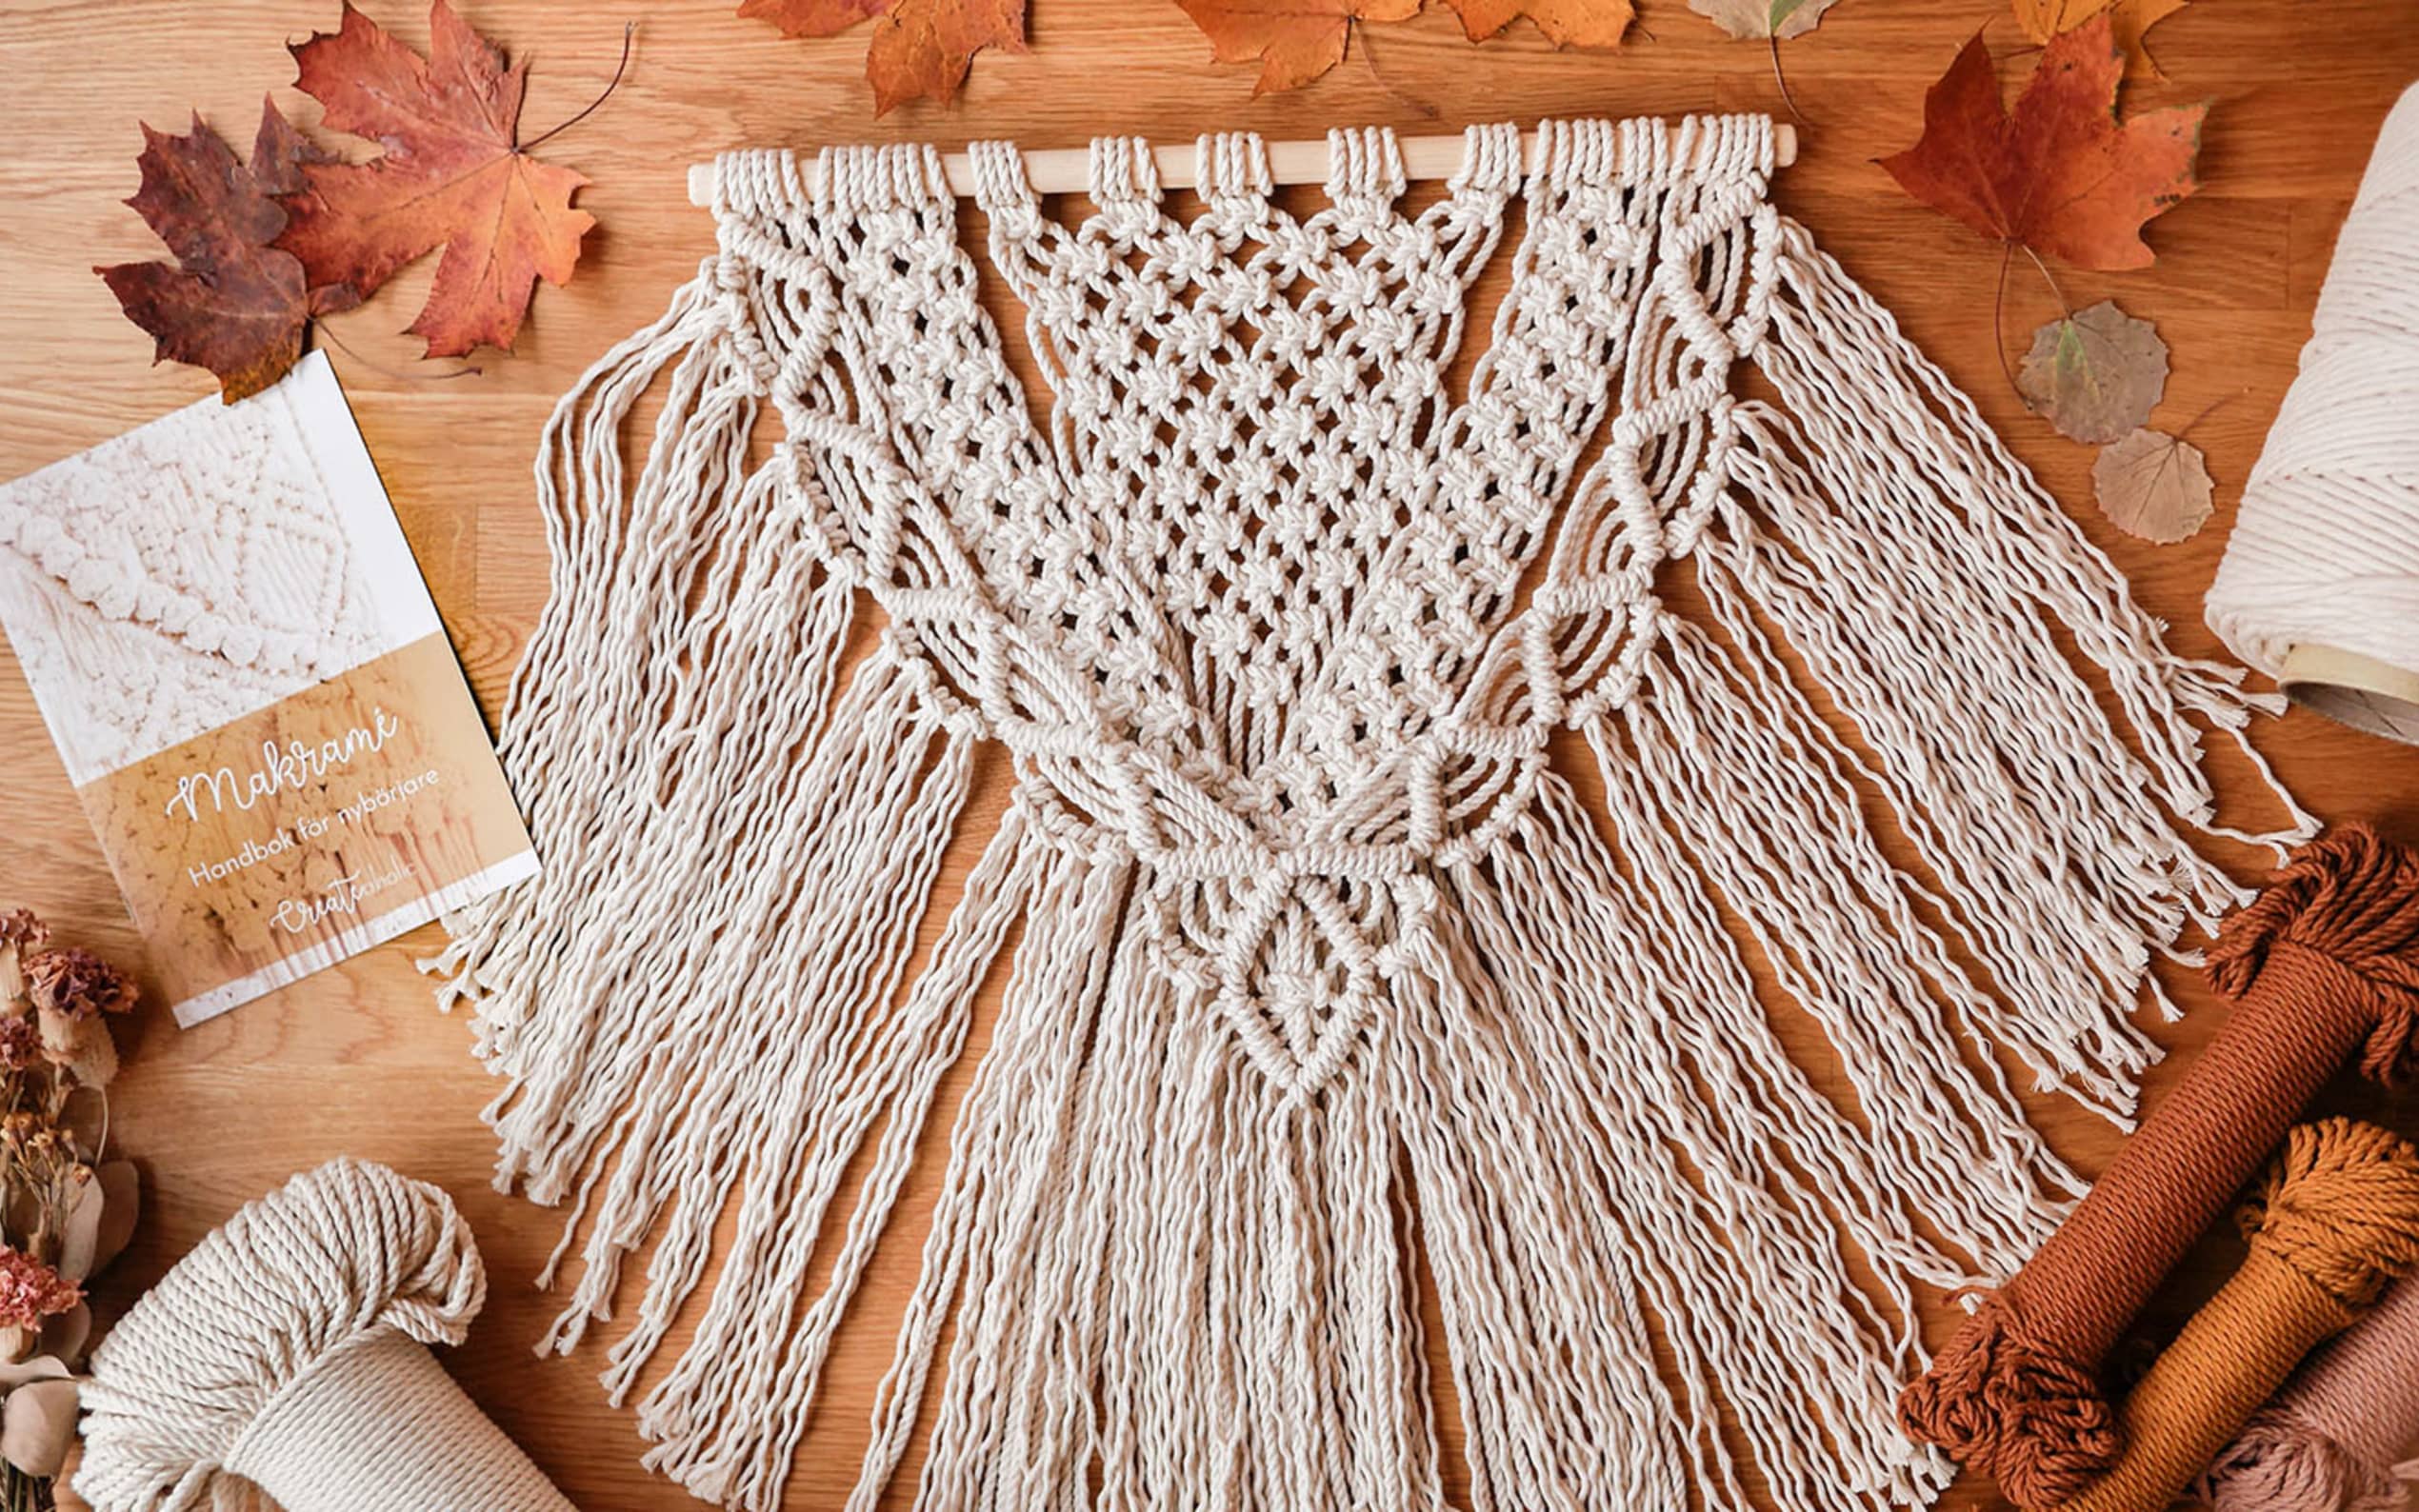 Make your own macramé wall hanging